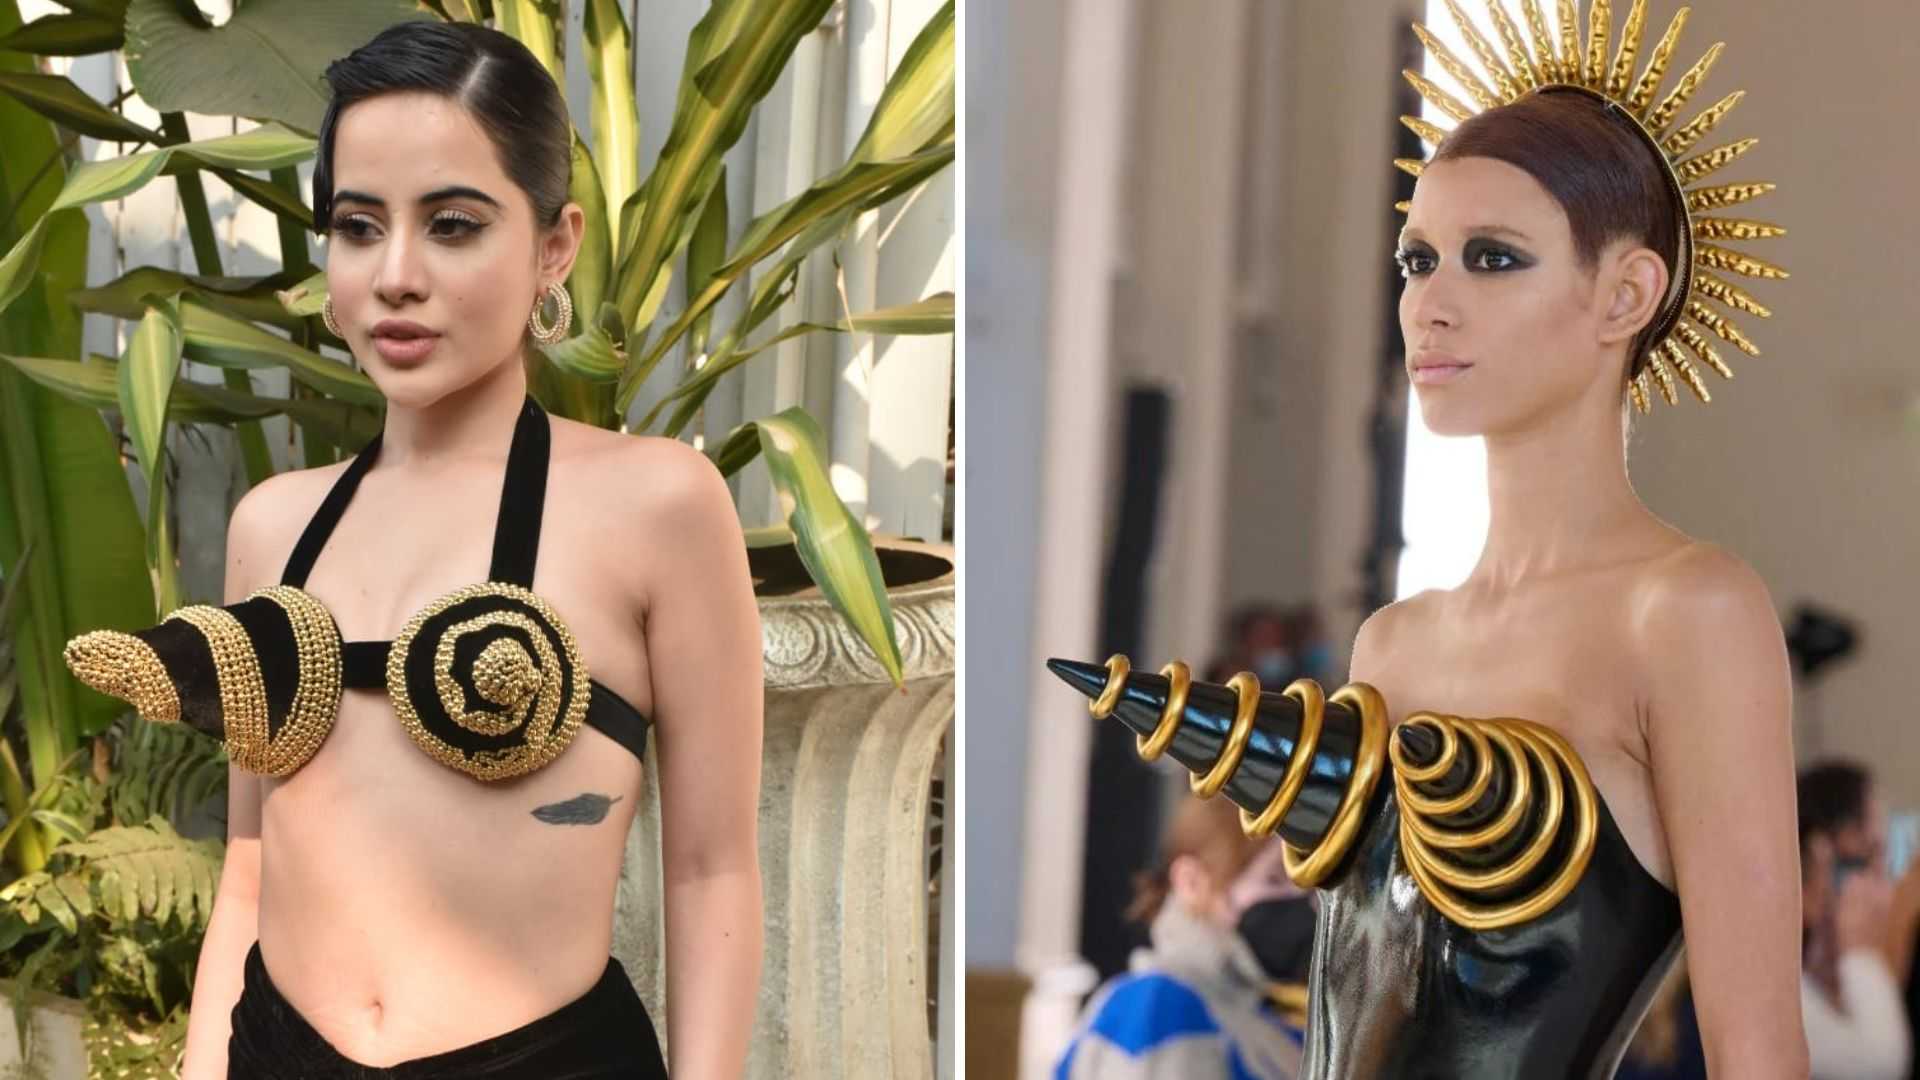 Urfi Javed now recreates the coned bra outfit from the Schiaparelli Haute Couture, here's how netizens reacted